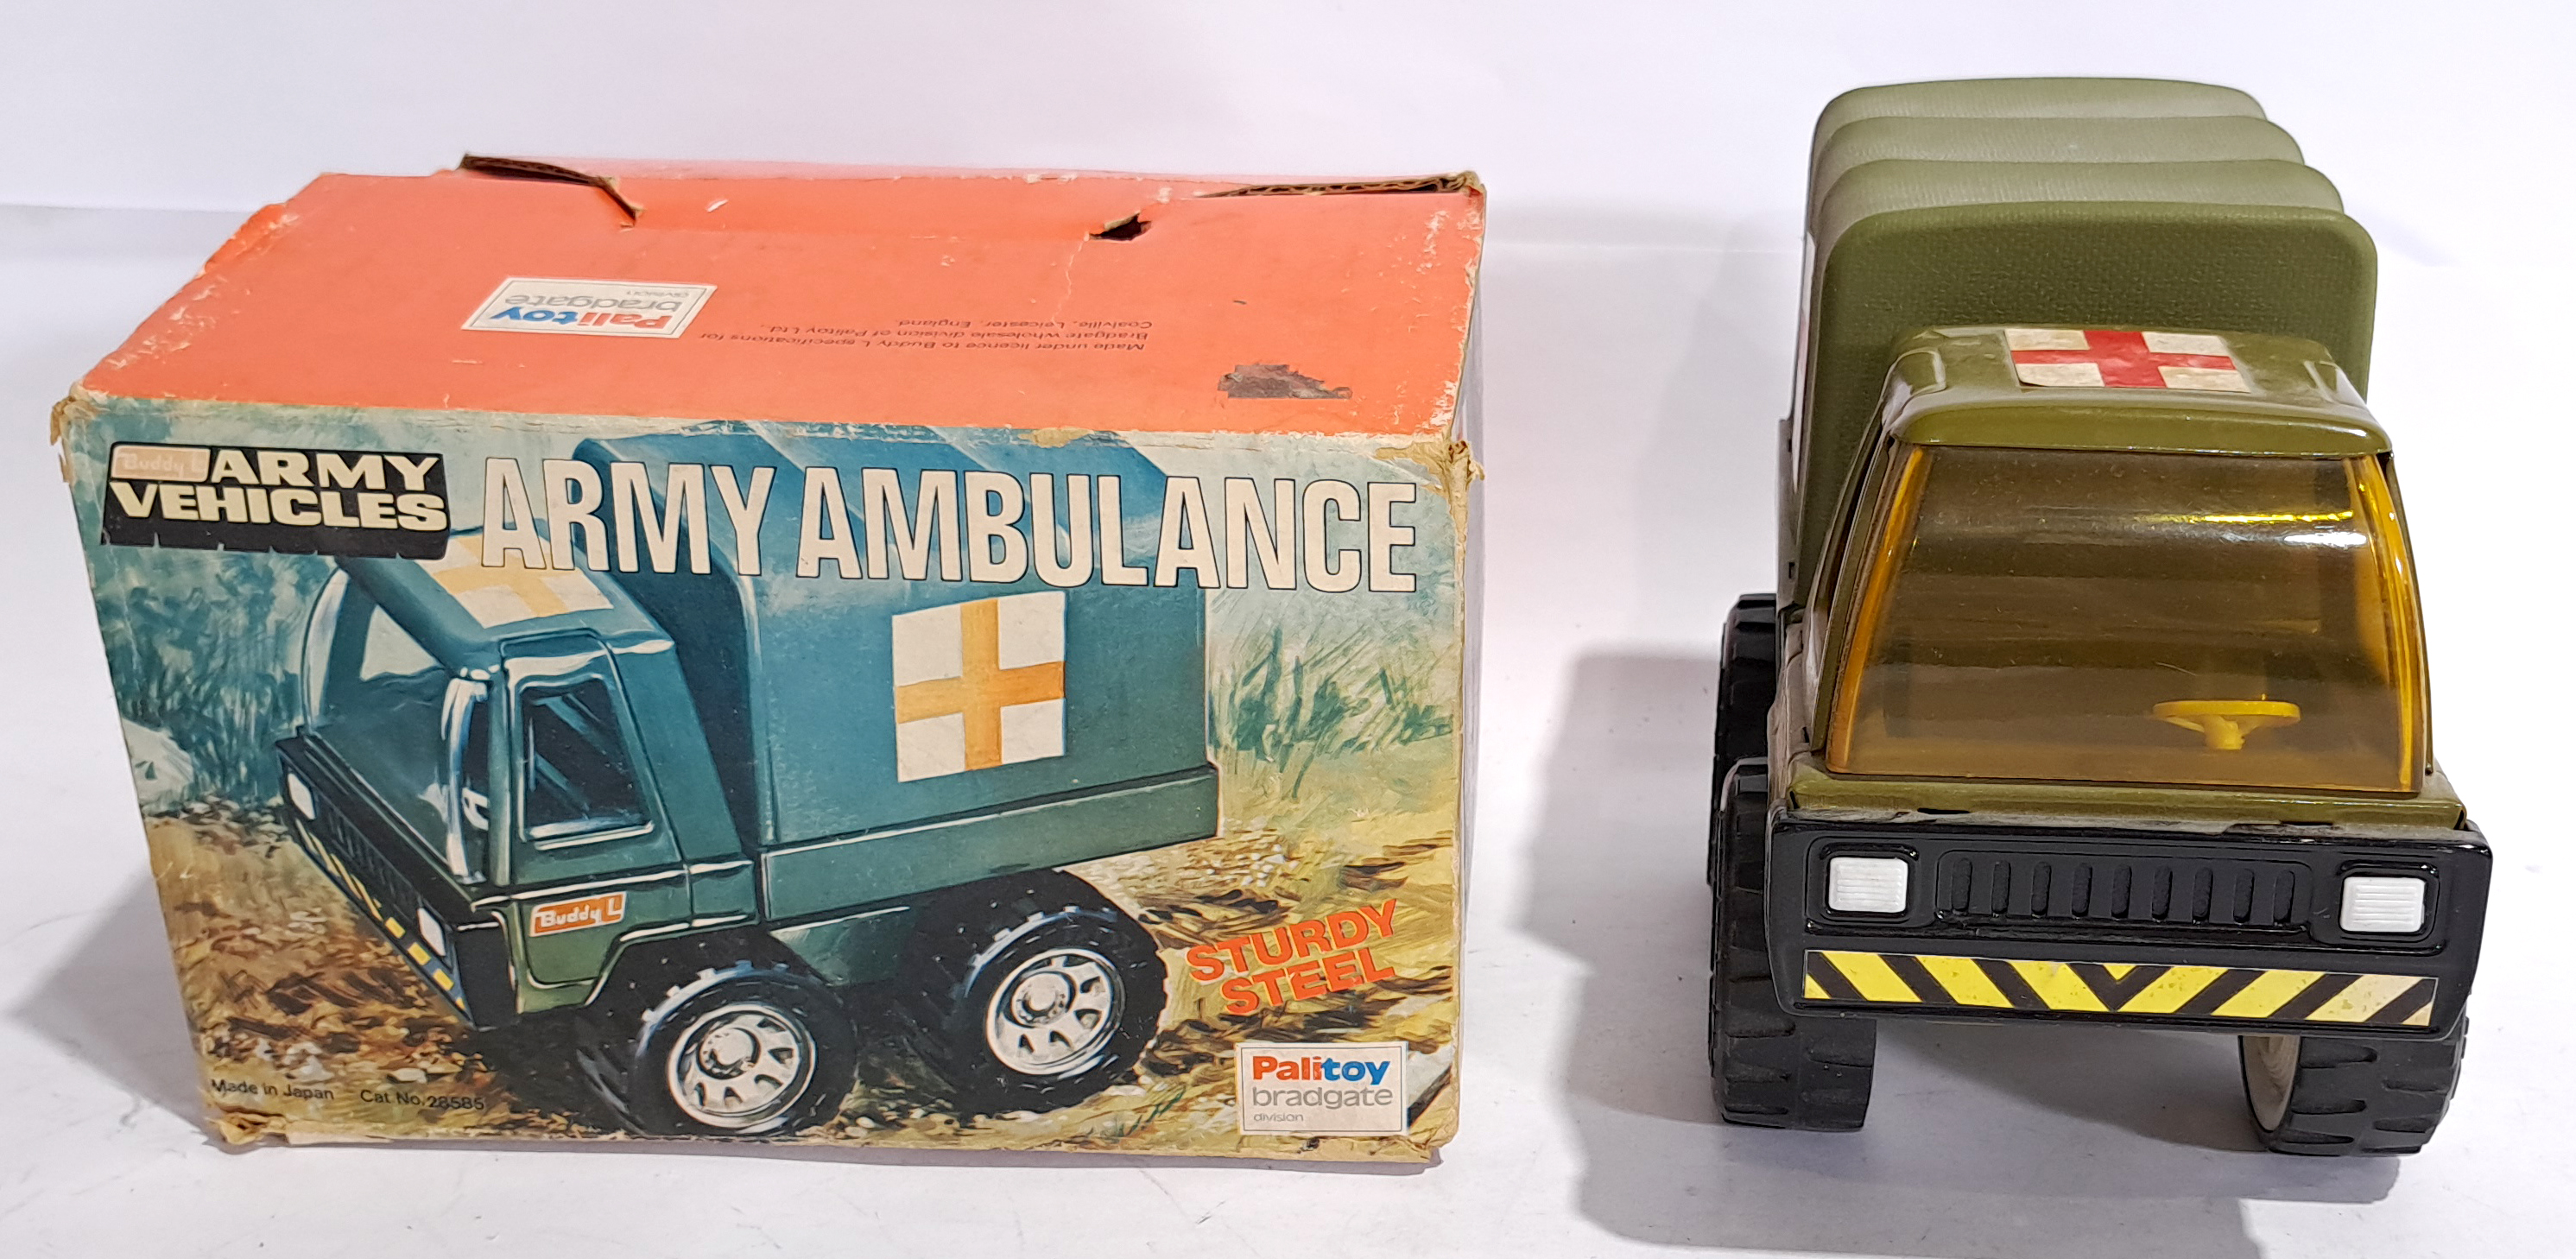 Palitoy Sturdy Steel & similar, Military Ambulance, a boxed & unboxed group - Image 2 of 2